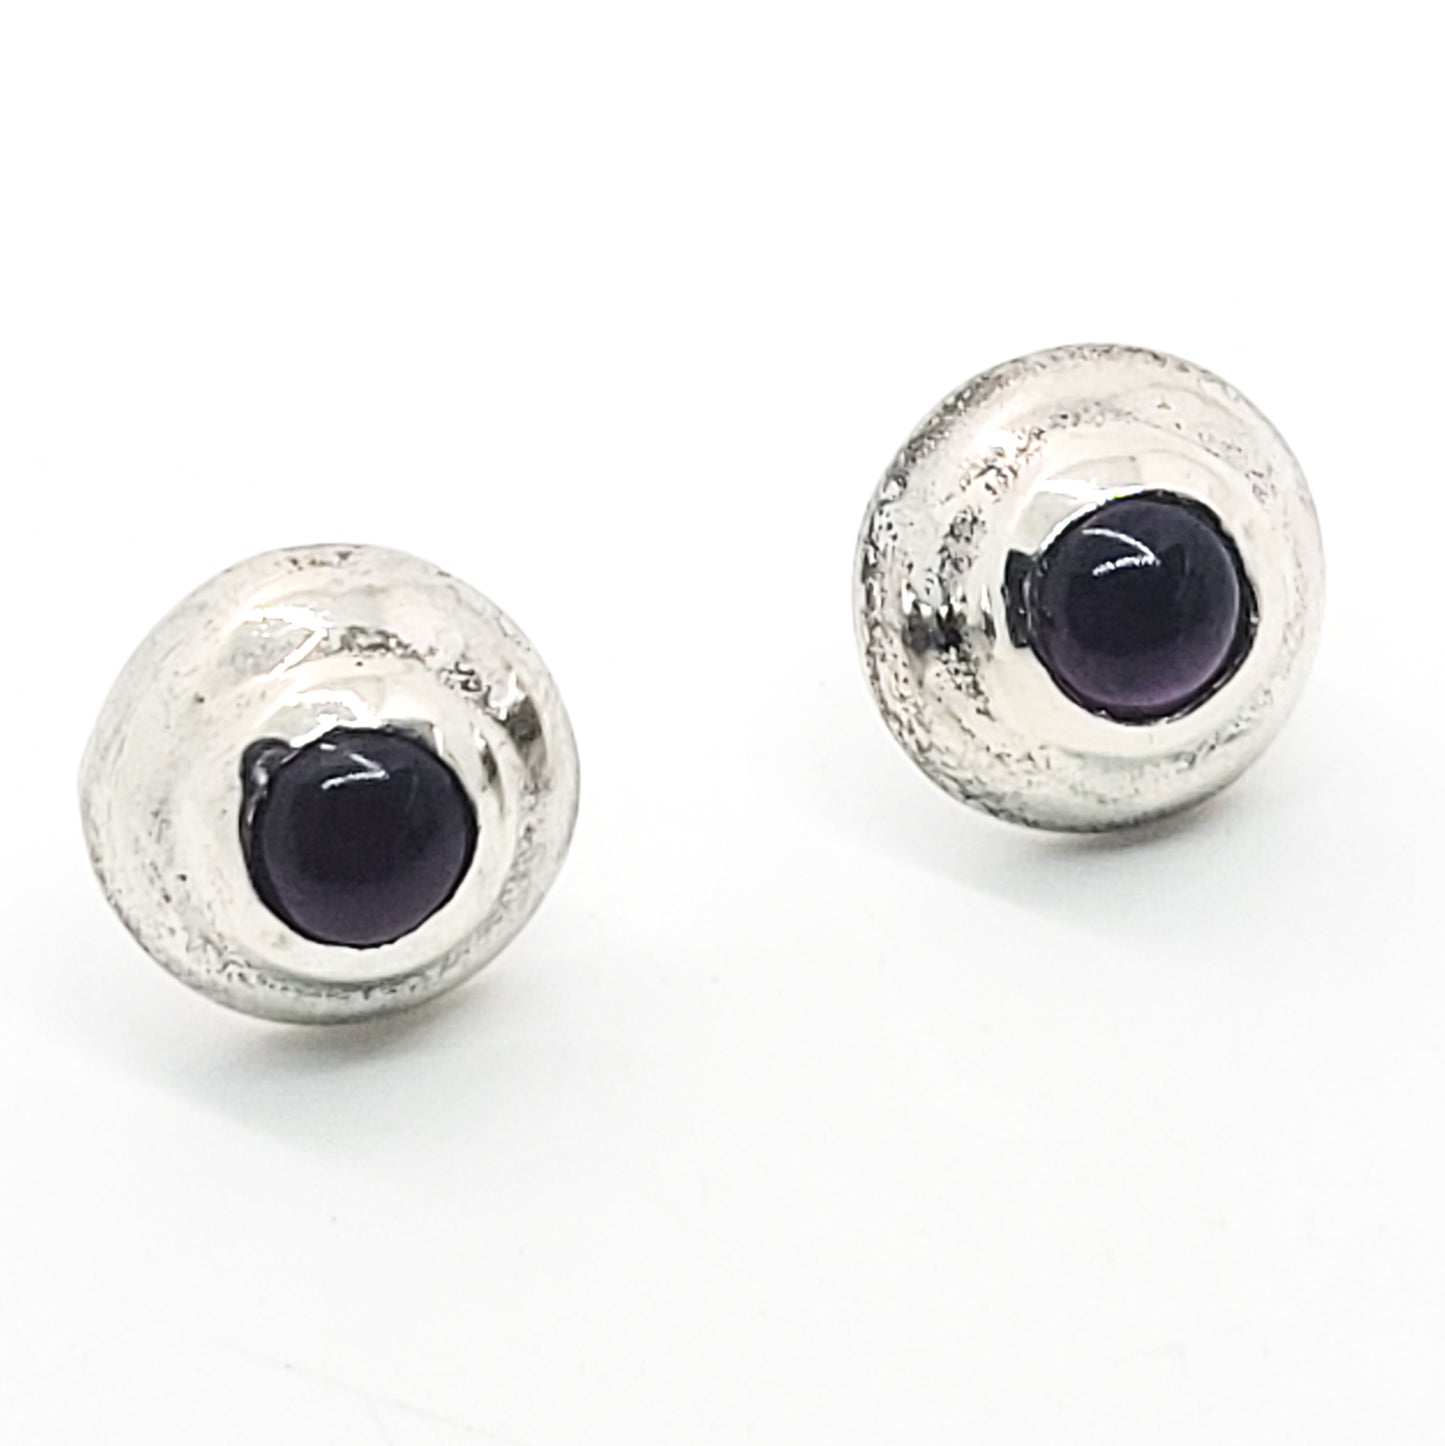 Mexican Amethyst Dome sterling silver vintage stud earrings 925